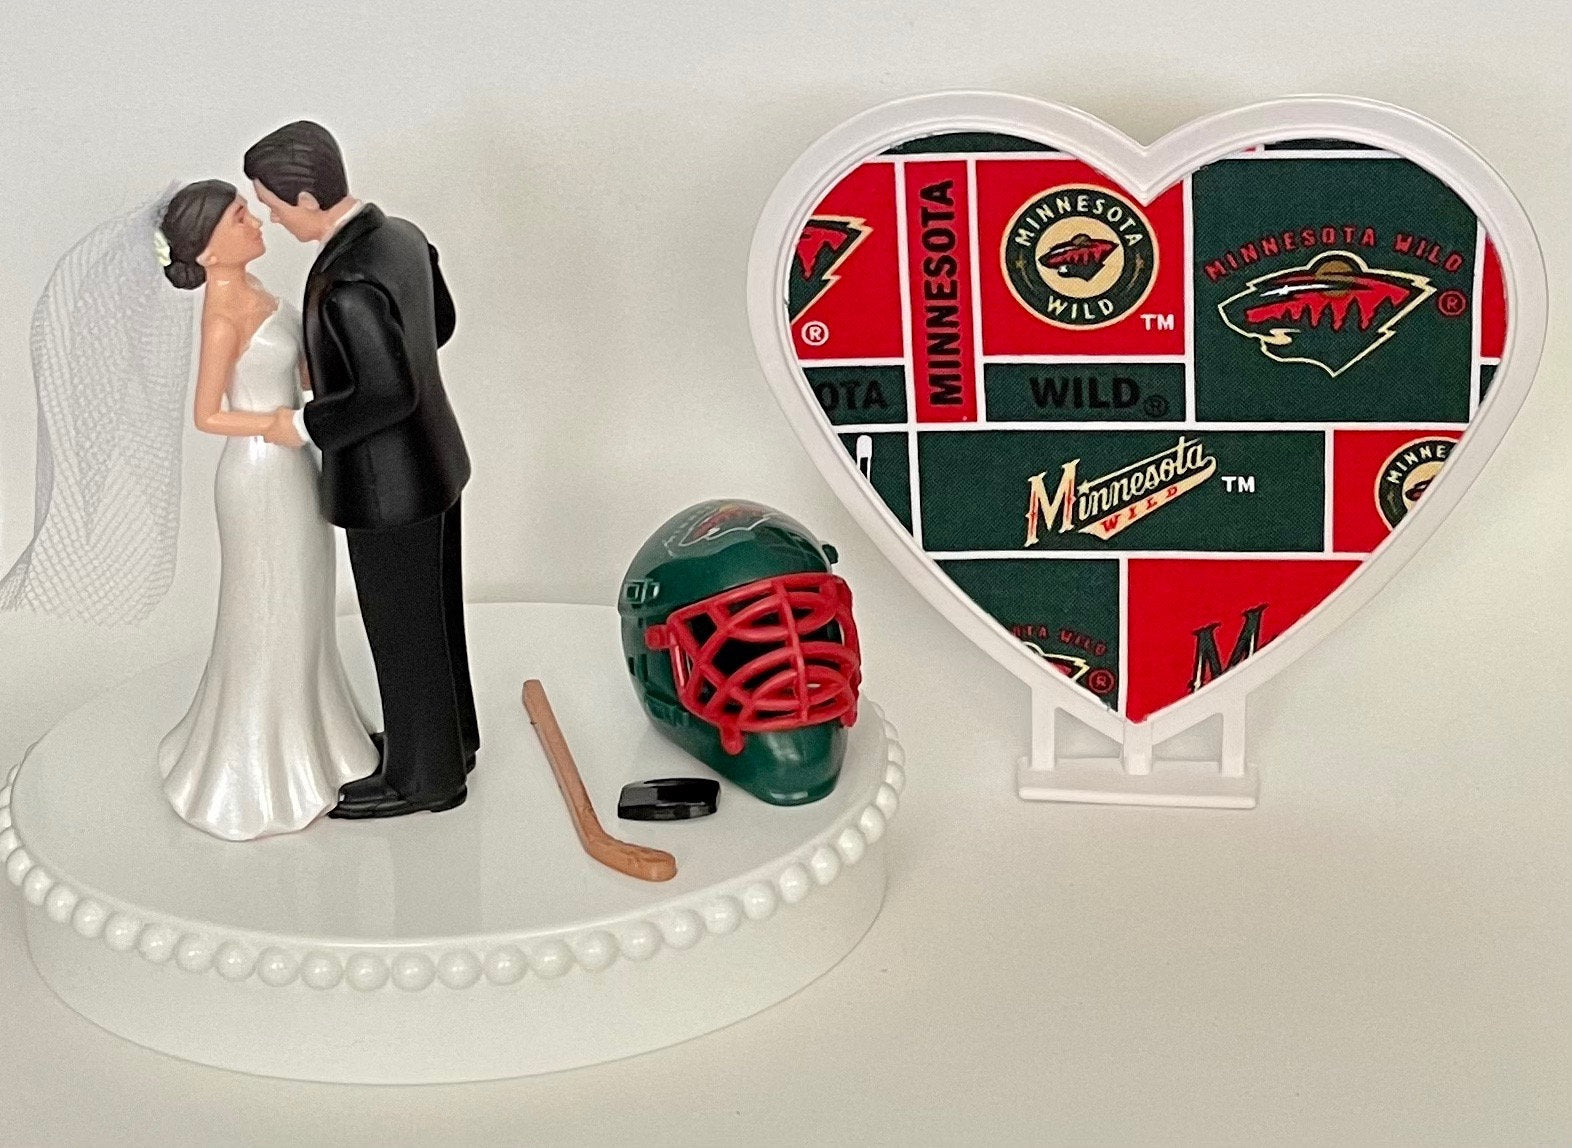 Wedding Cake Topper Minnesota Wild Hockey Themed Pretty Short-Haired Bride and Groom Unique Sports Fans Groom's Cake Top Reception Gift